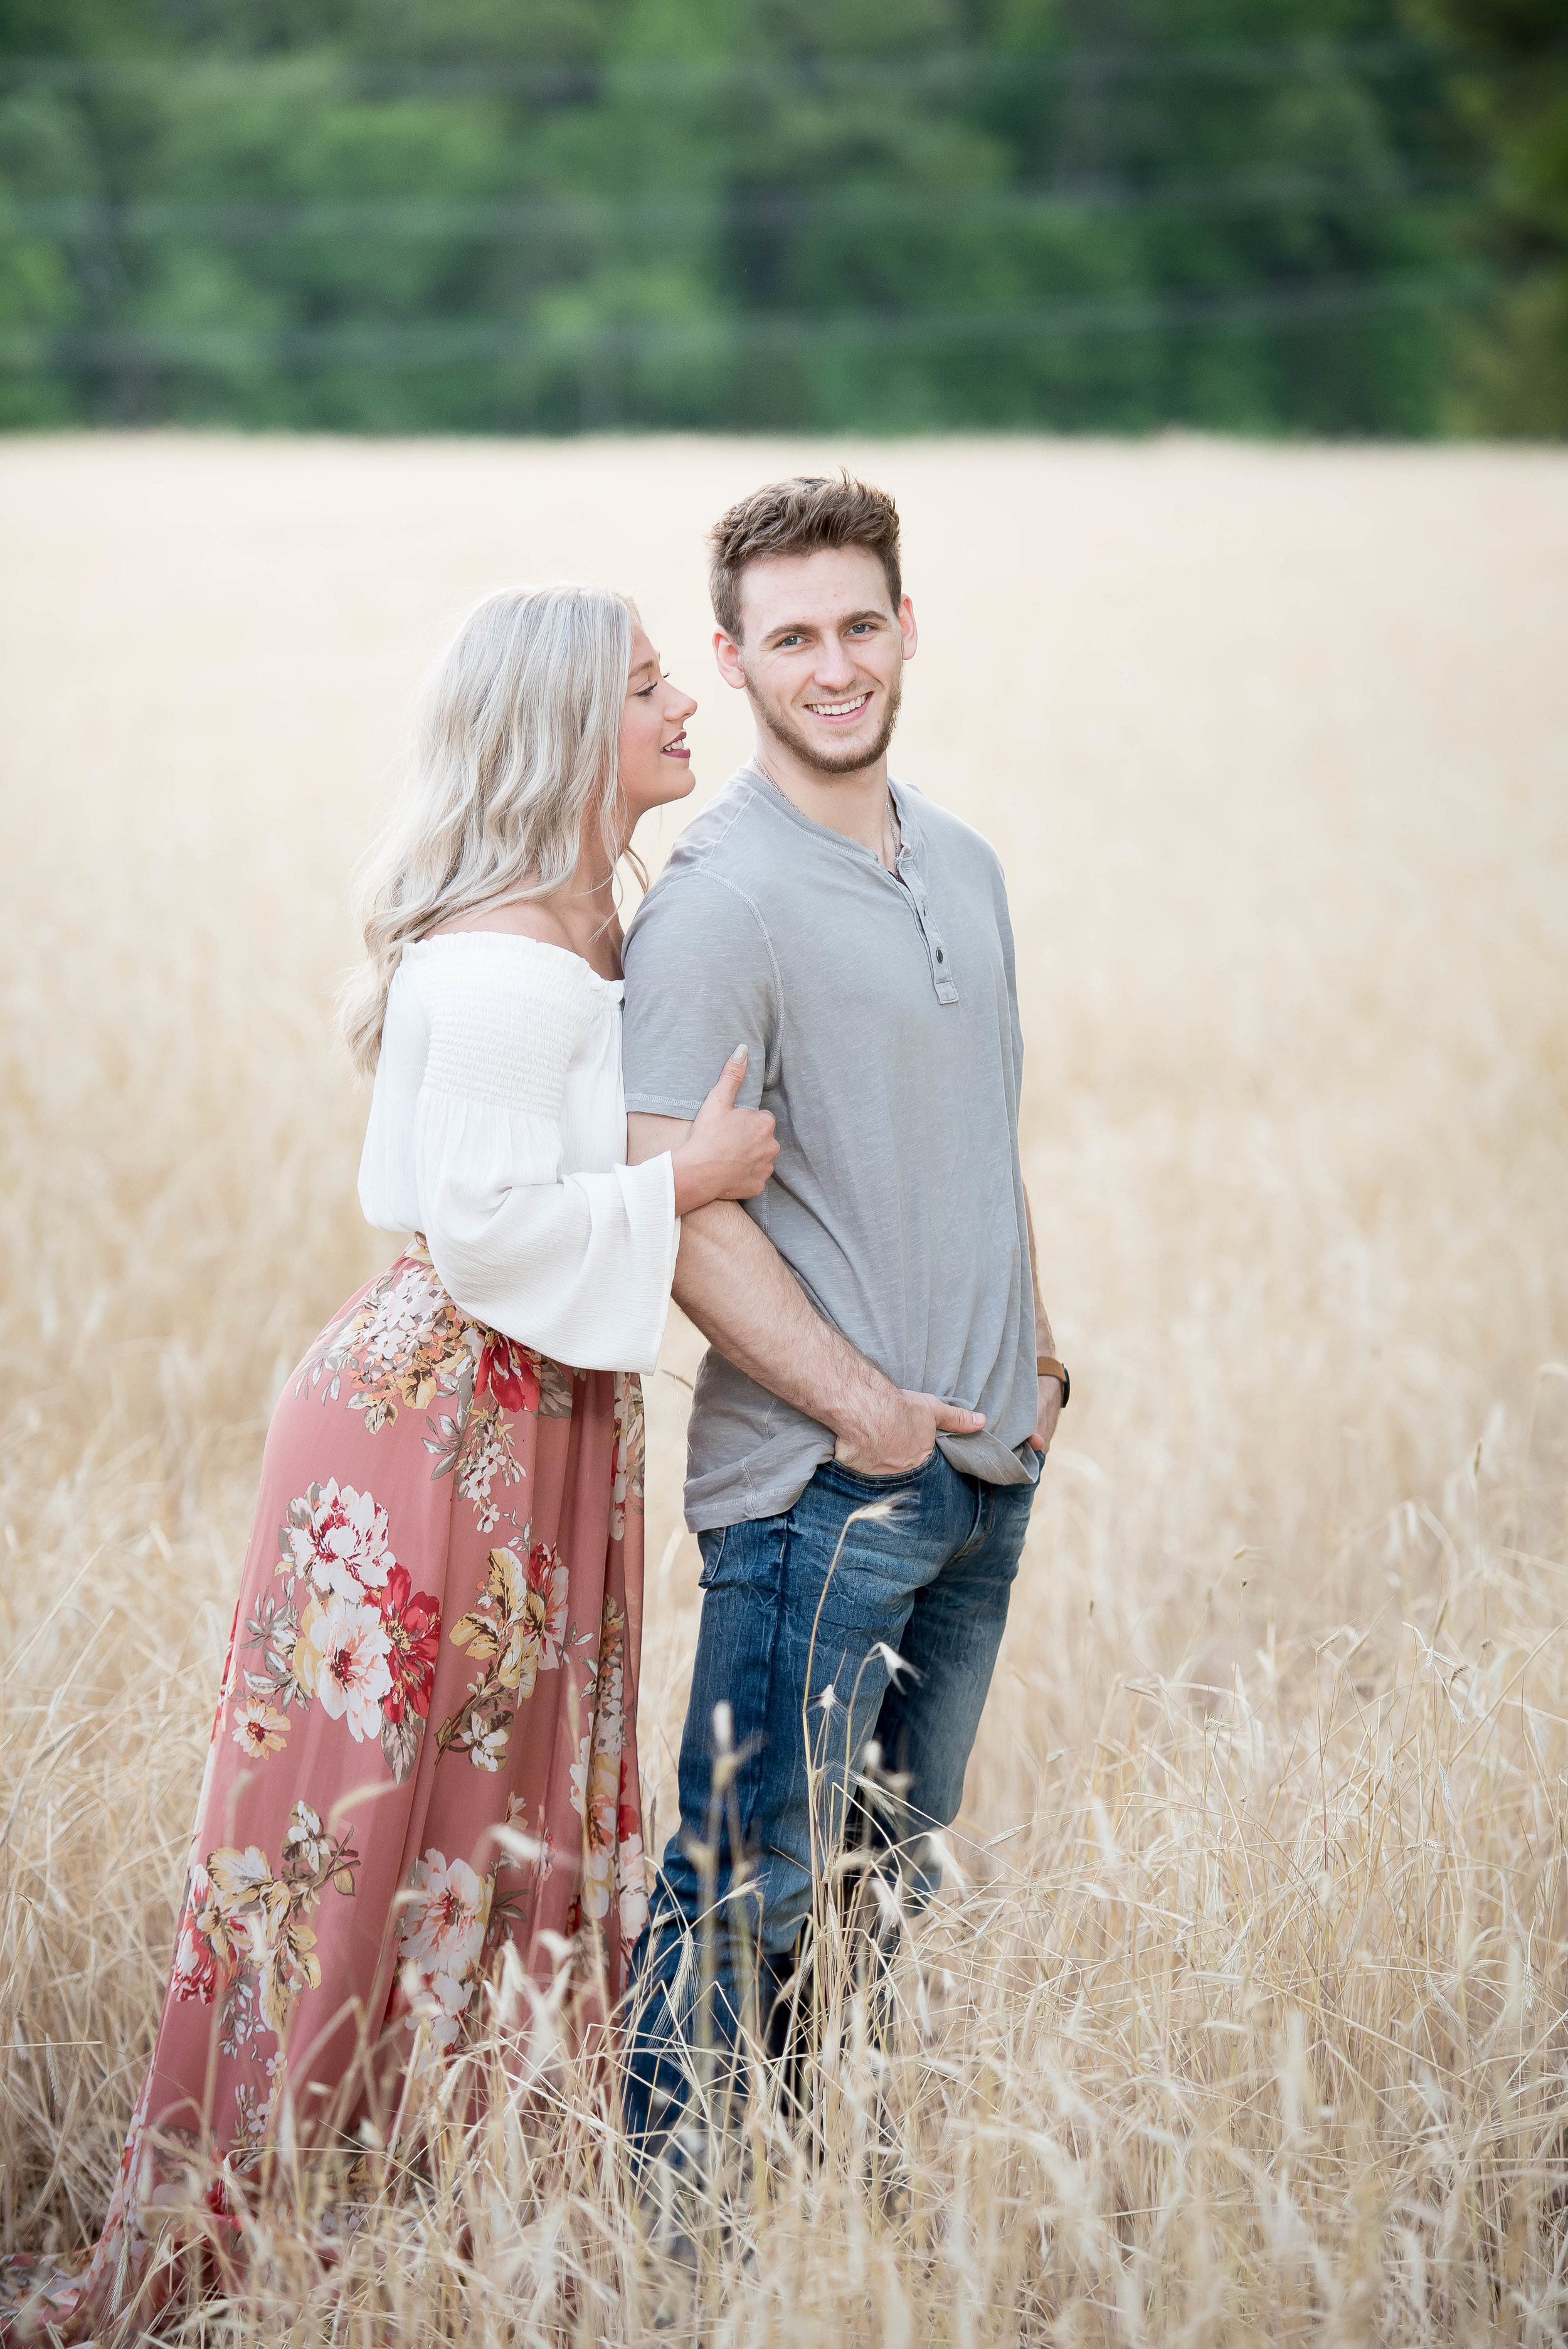 Couple Session - Fitness Couples - Tall Grass Field - Engagement Portrait Ideas - Engagement Session Ideas - Couple Session Ideas - Spring Picture Ideas-13.jpg